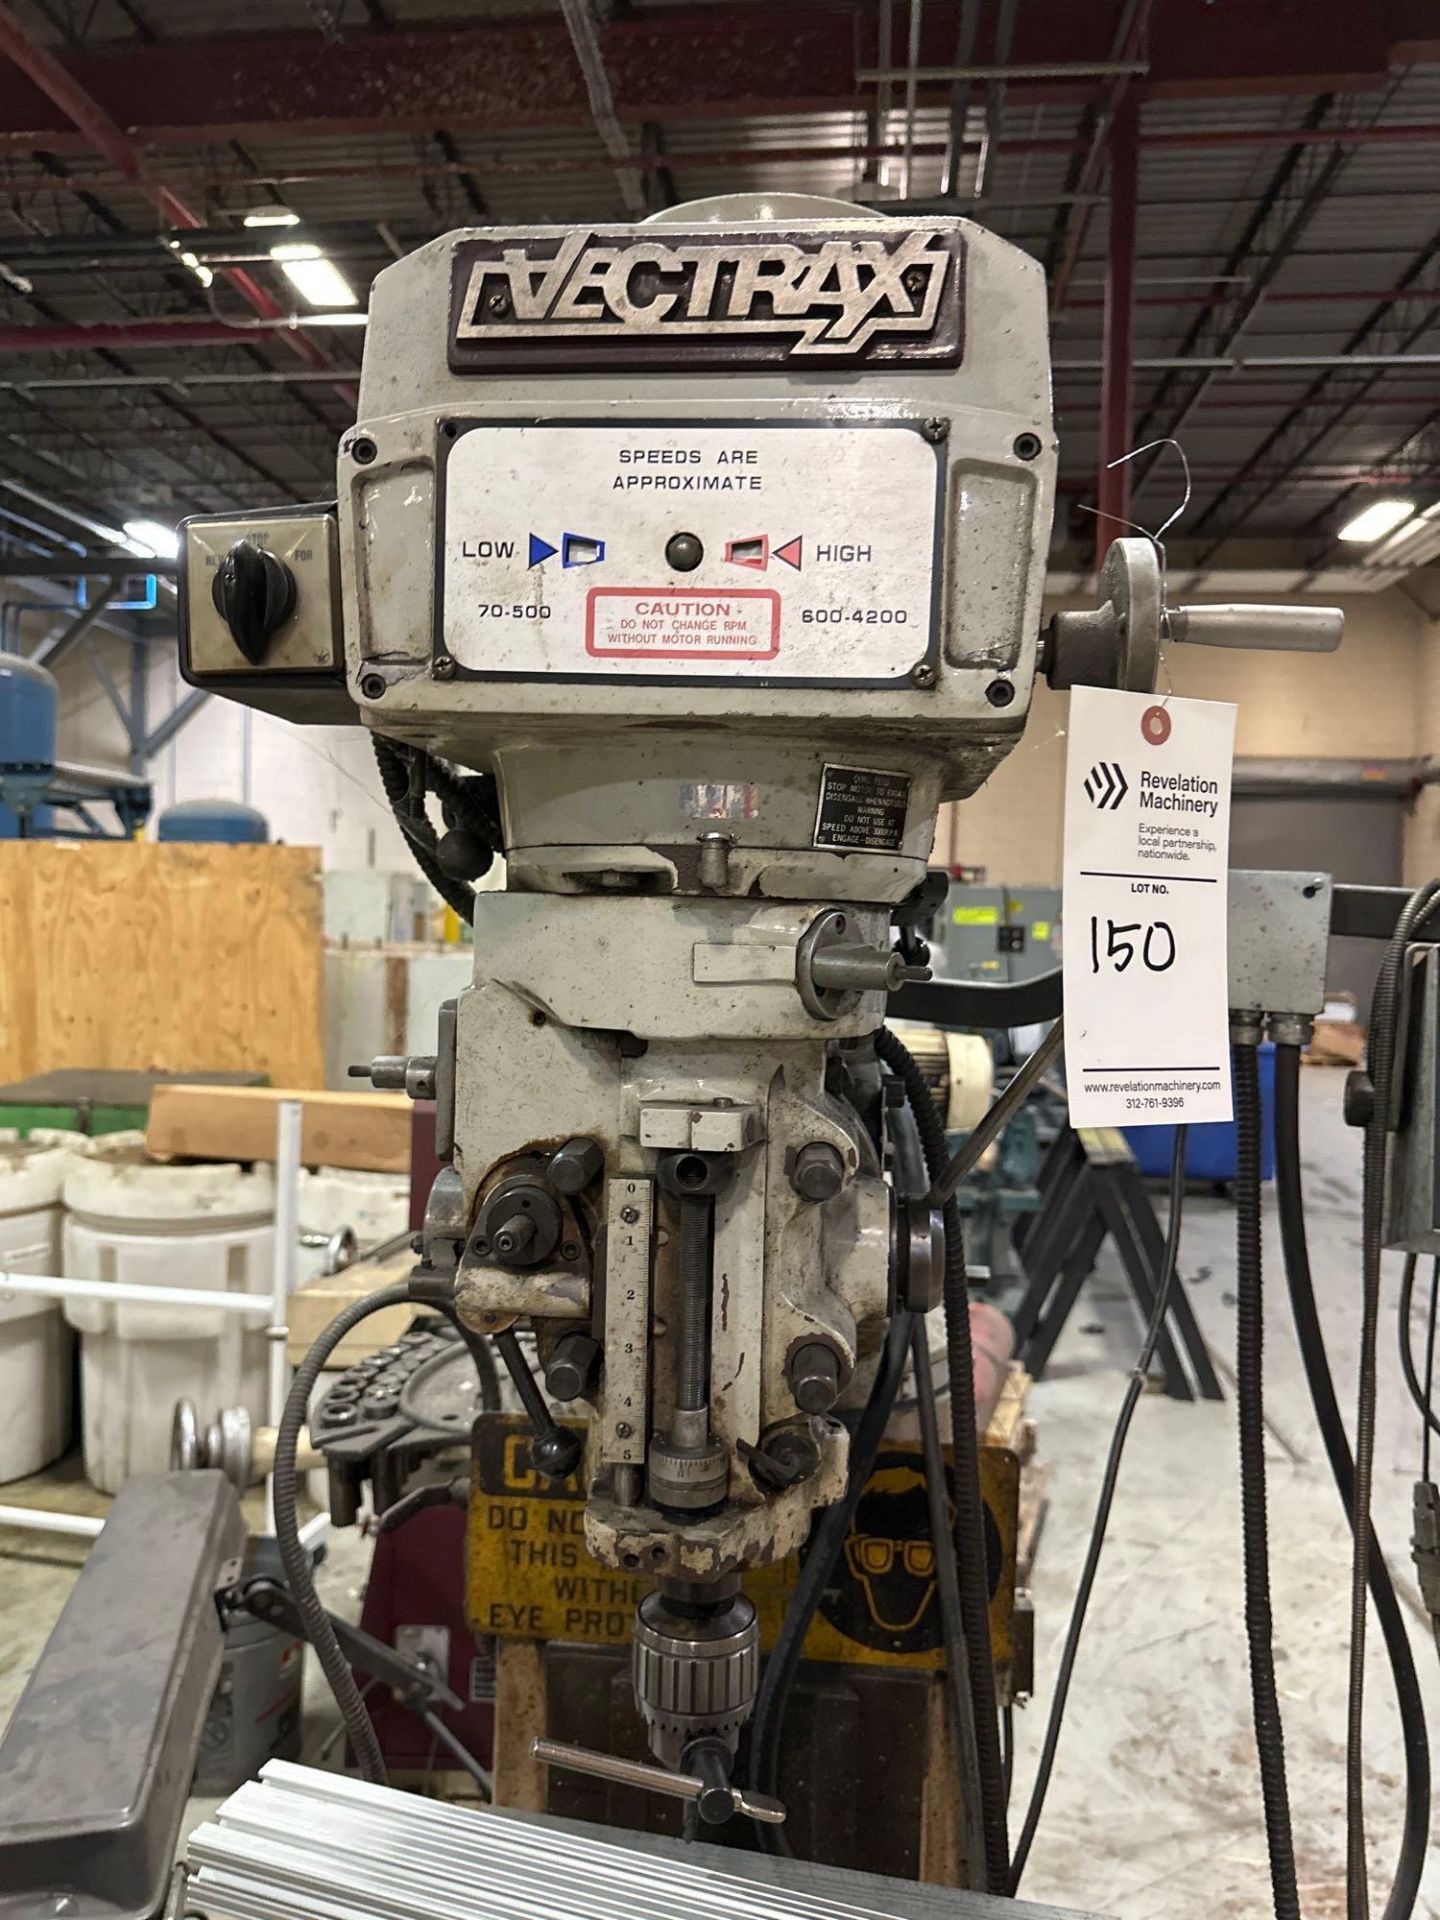 VECTRAX MODEL GS16V VERTICAL KNEE MILLING MACHINE W/ DRO - Image 2 of 6